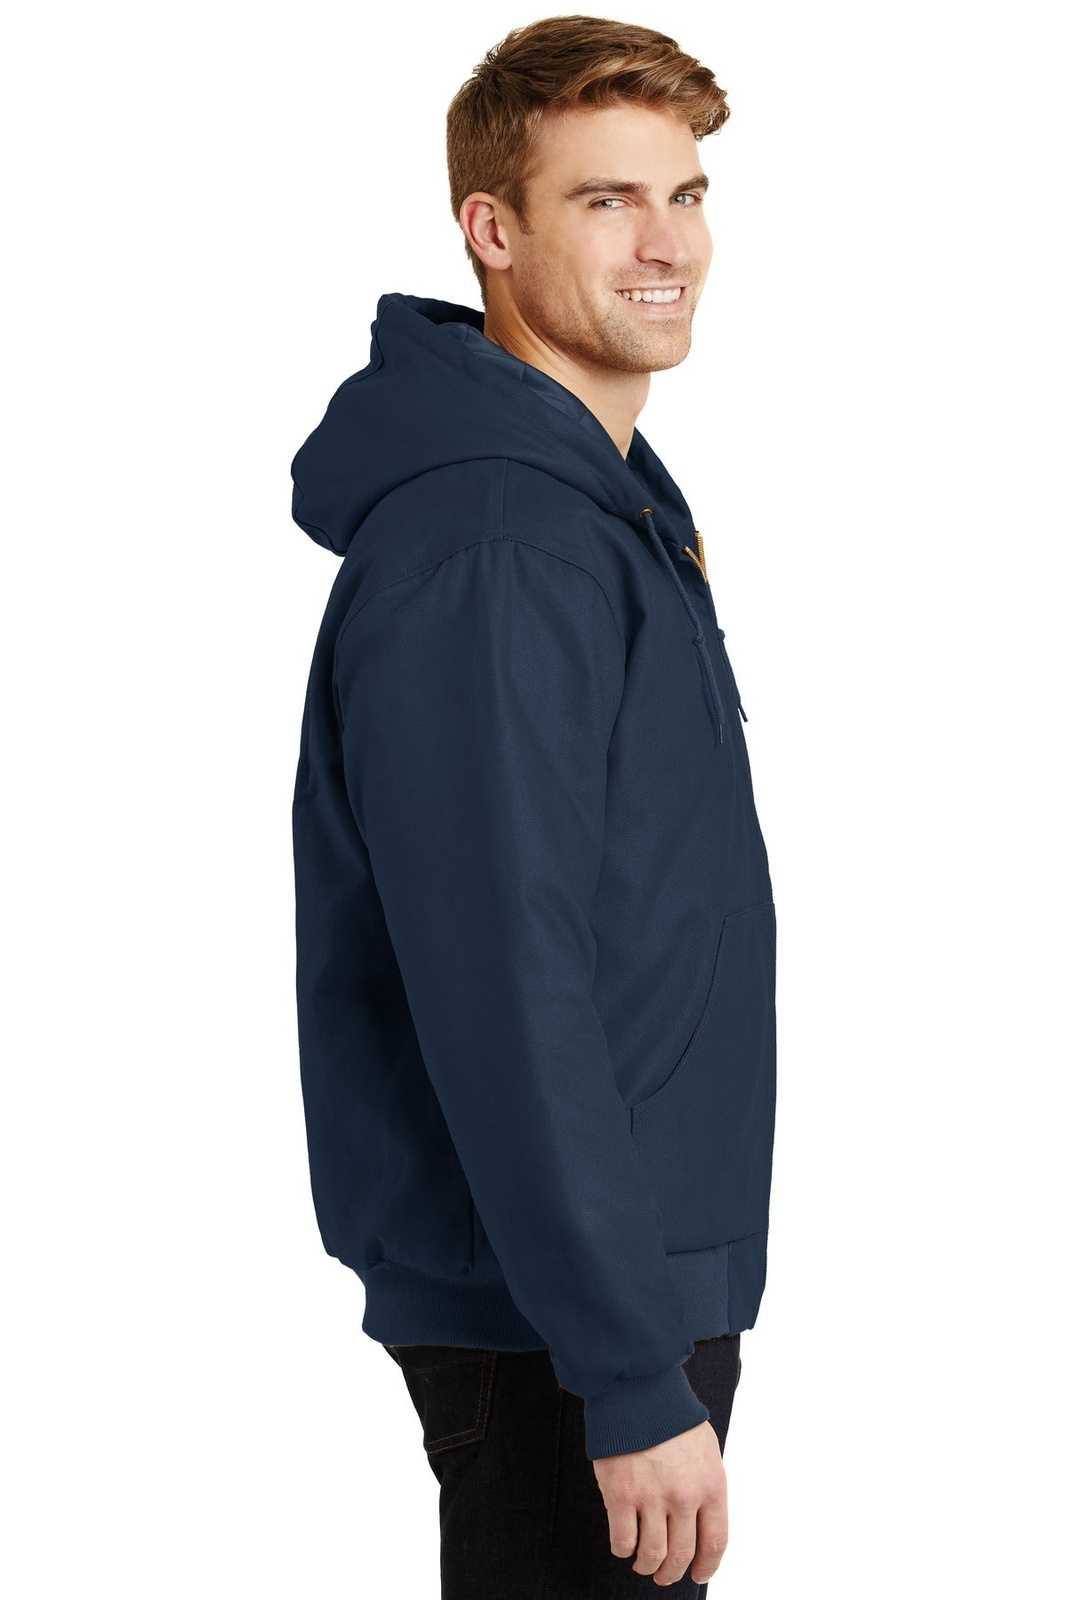 CornerStone J763H Duck Cloth Hooded Work Jacket - Navy - HIT a Double - 3